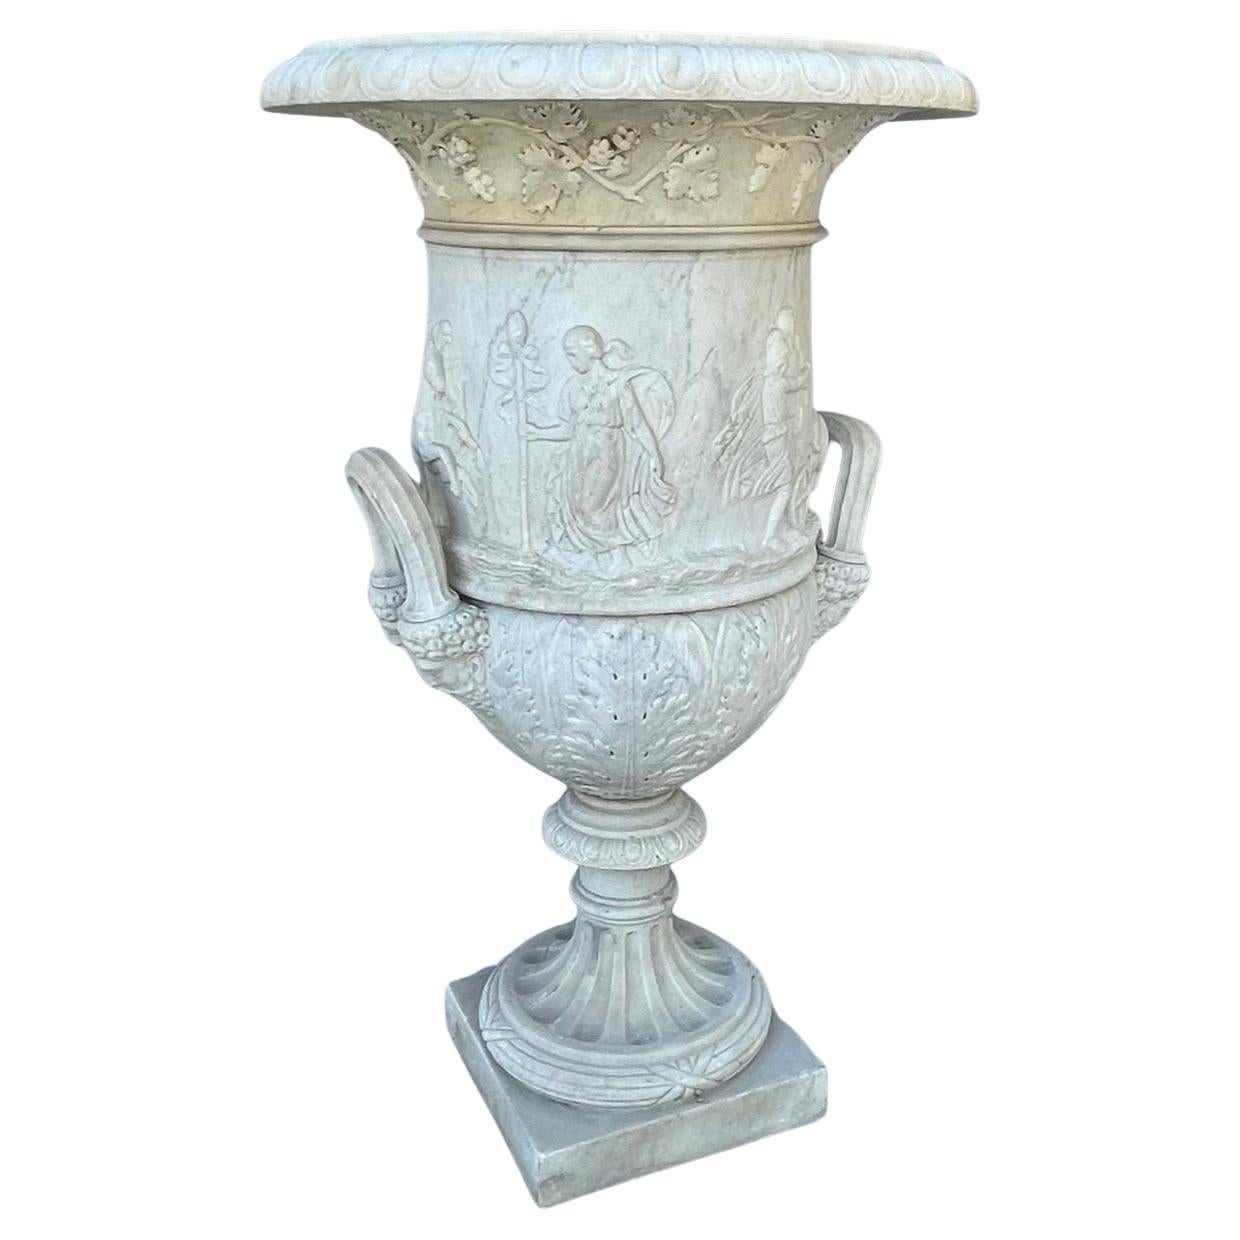 Monumental Italian White Marble Copy of the Medici Urn. Early 20th Century. For Sale